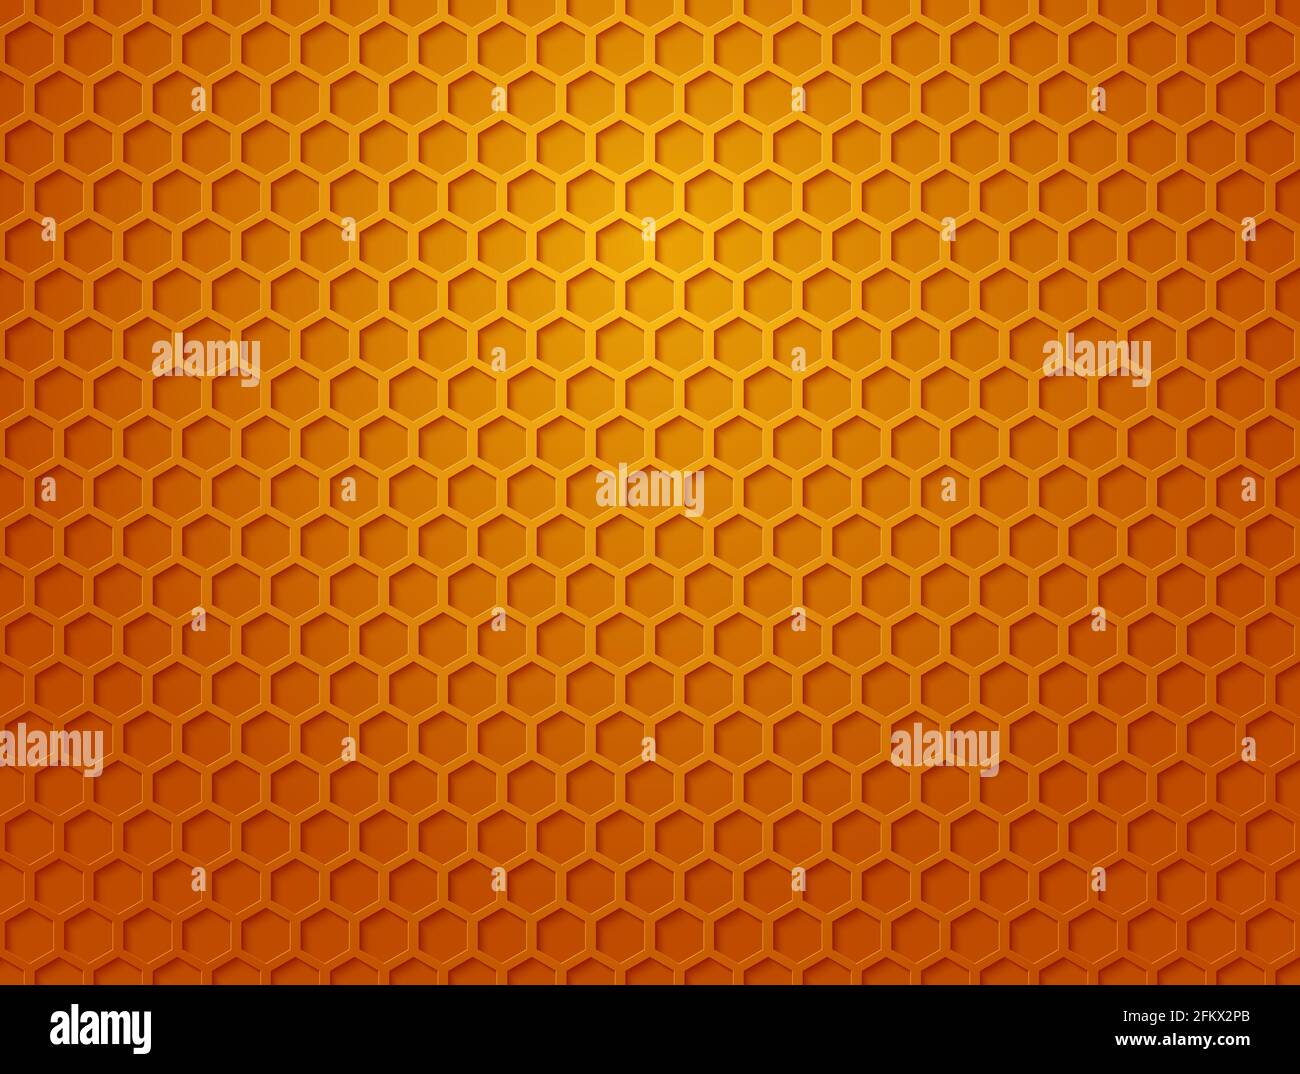 Honeycomb background. Texture and pattern of a section of wax honeycomb from a bee hive filled with golden honey. Vector orange pattern for honey Stock Vector